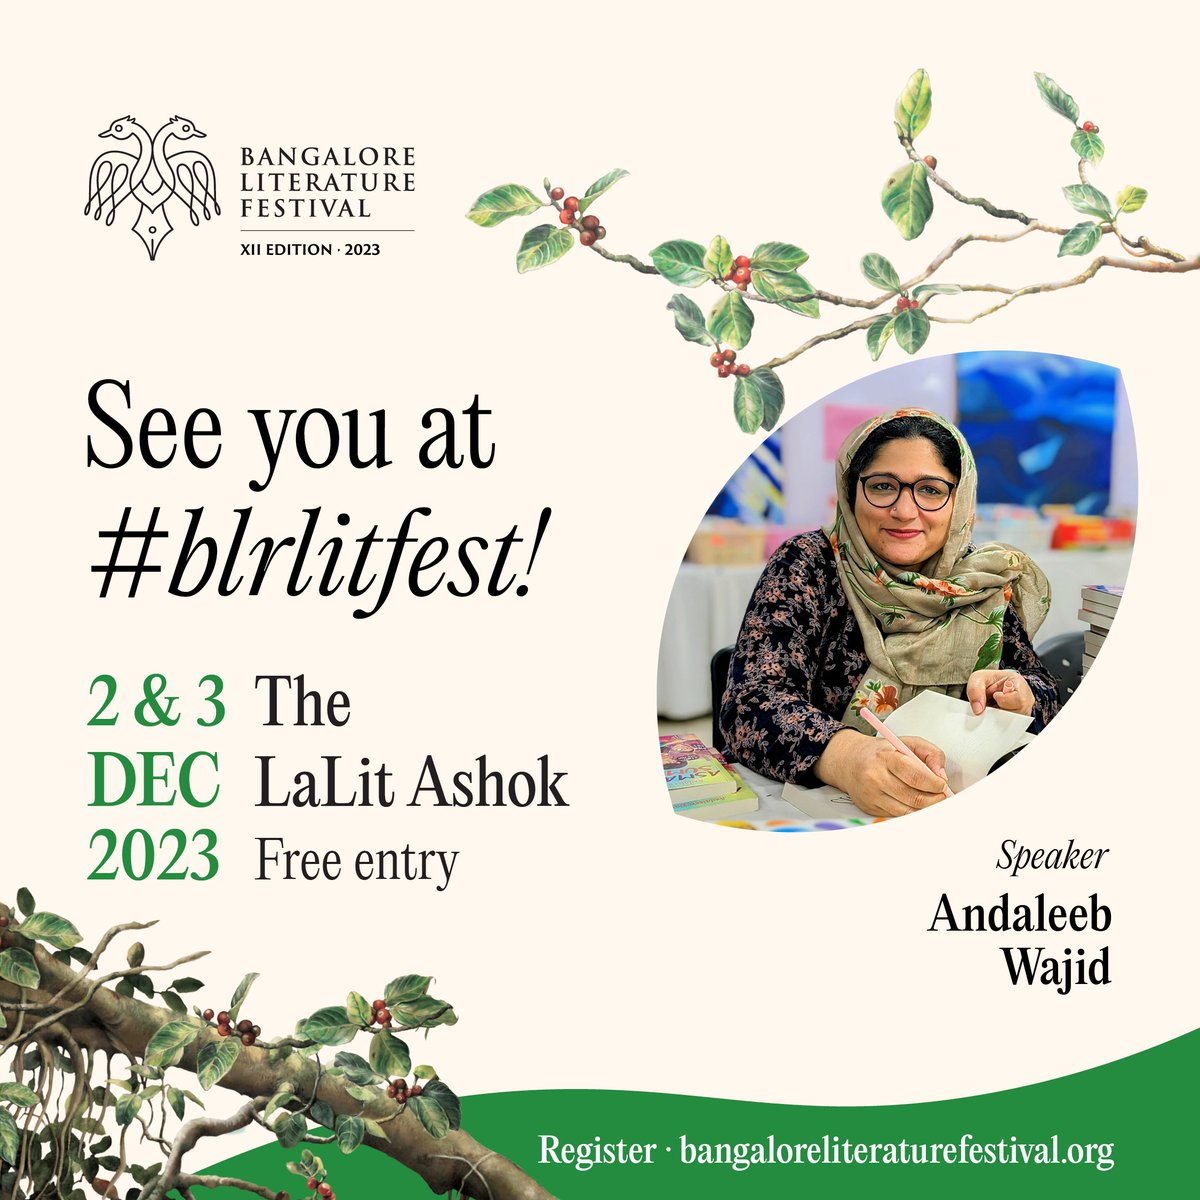 Hello! Happy to be participating in this year's @BlrLitFest! 😊 Looking forward to connecting with readers, fellow writers and attending some lovely sessions this weekend!